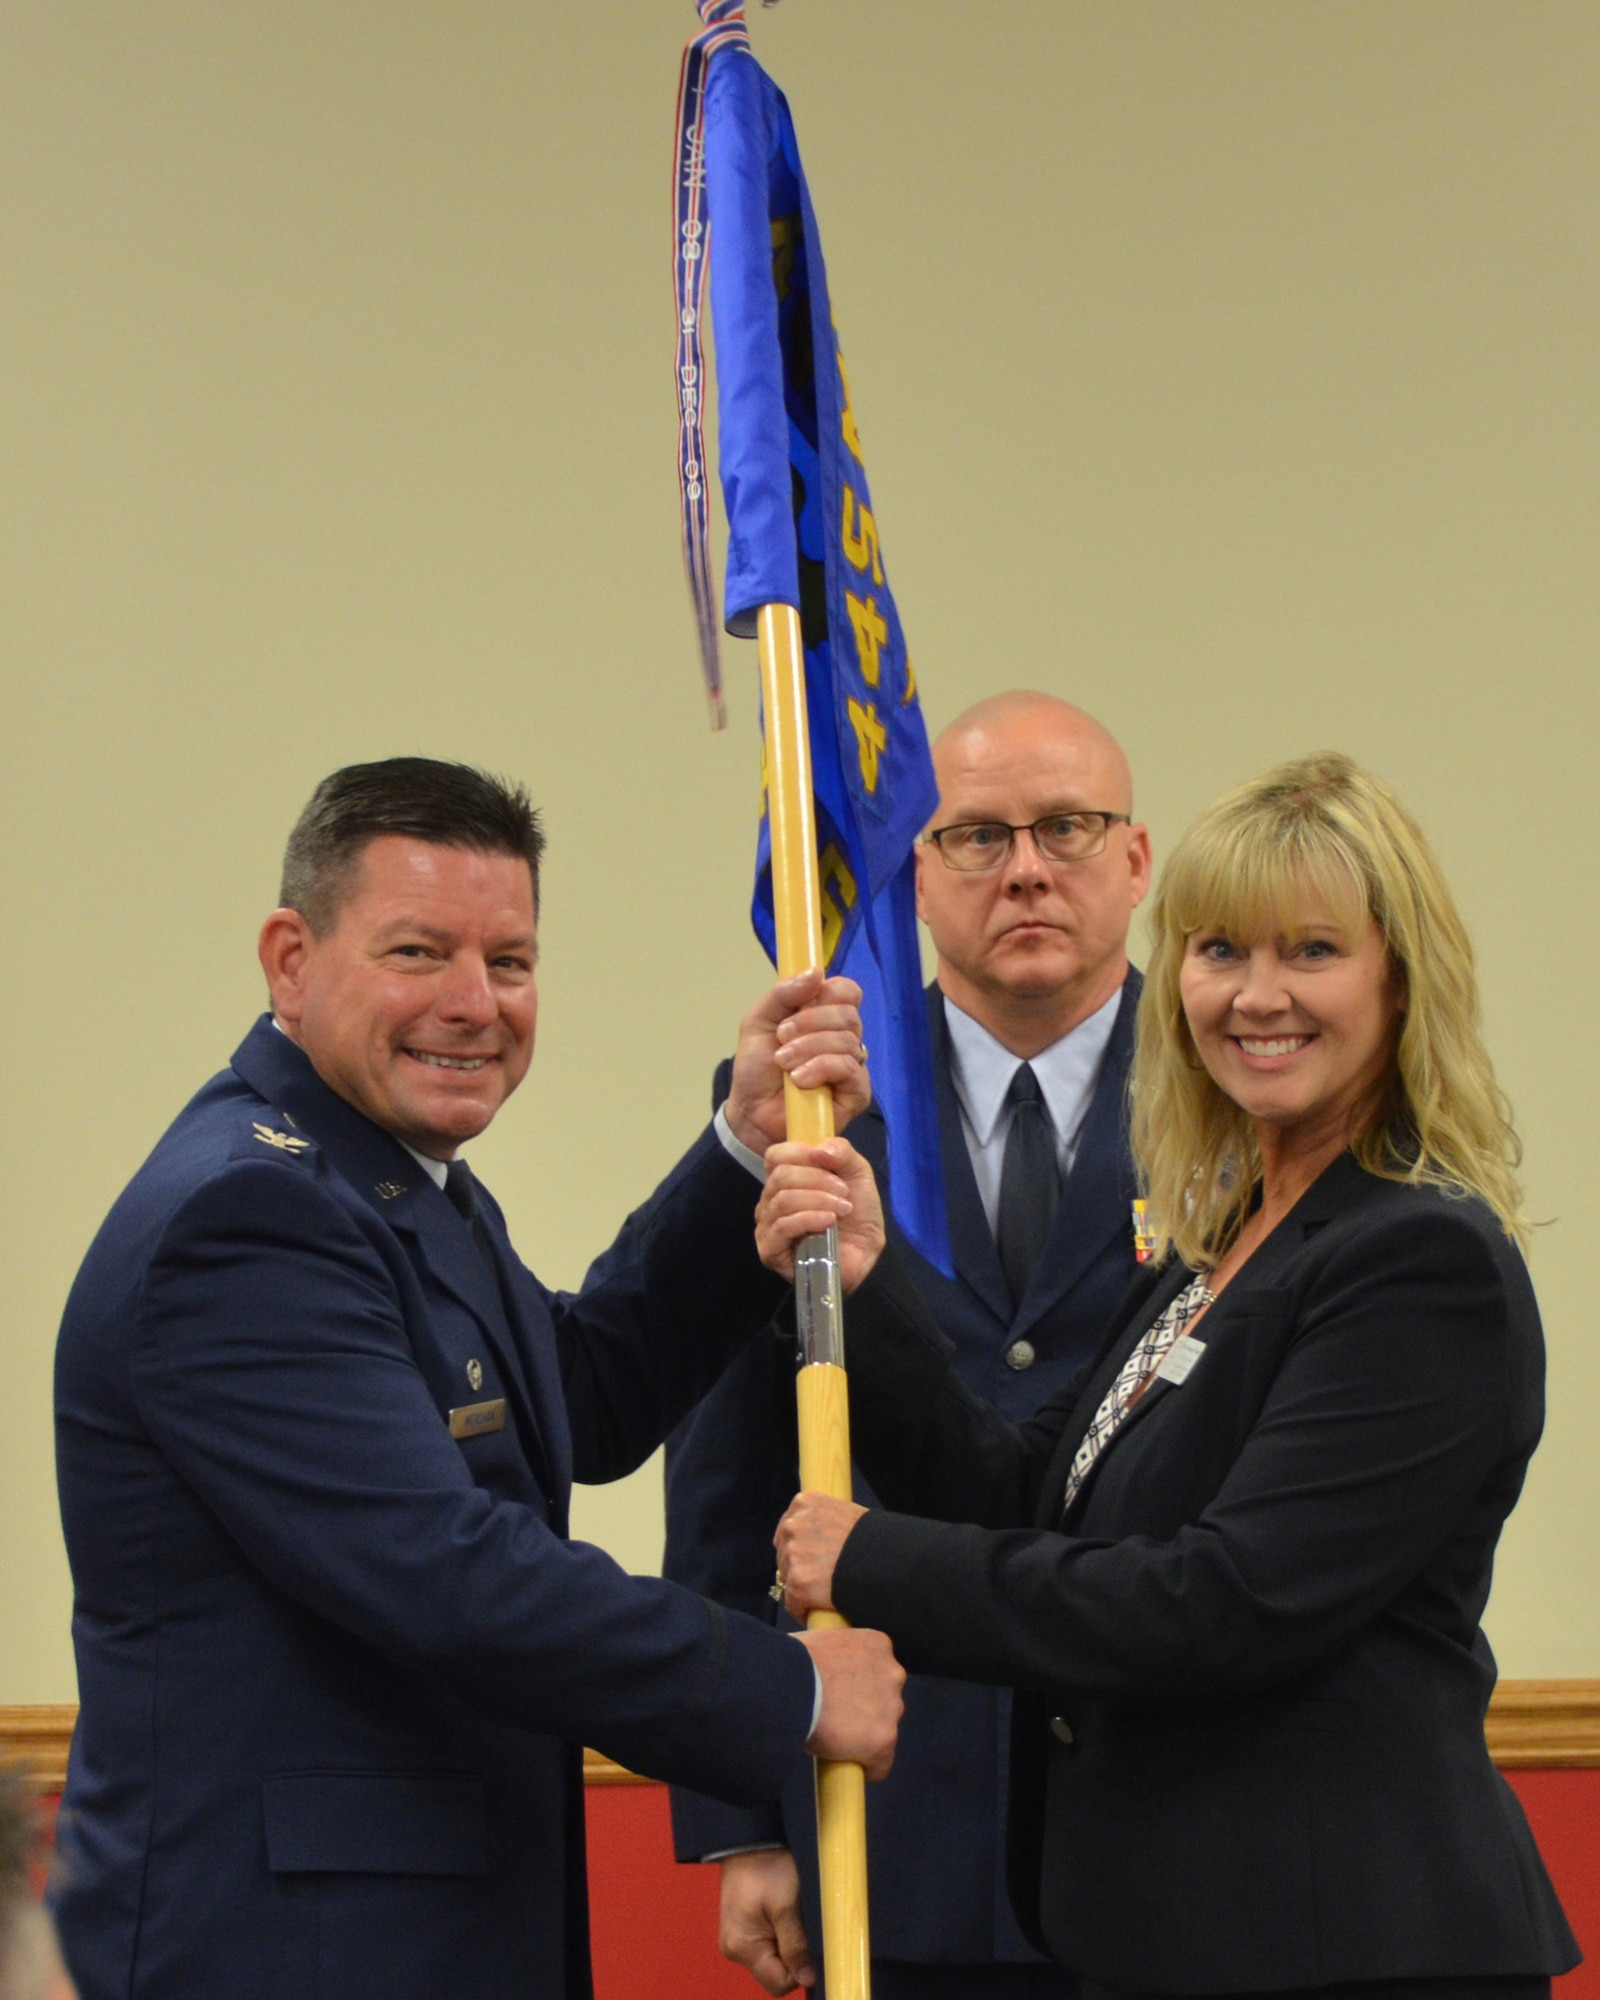 Suzanne Winter, WENCO Construction and honorary commander of the 87th Aerial Port Squadron receives the 87th APS guidon from Col. Shawn Werchan, 445th Airlift Wing vice commander, at the wing’s honorary commanders induction ceremony, Sept. 6, 2019. Eighteen members from the surrounding communities were officially designated as honorary commanders.